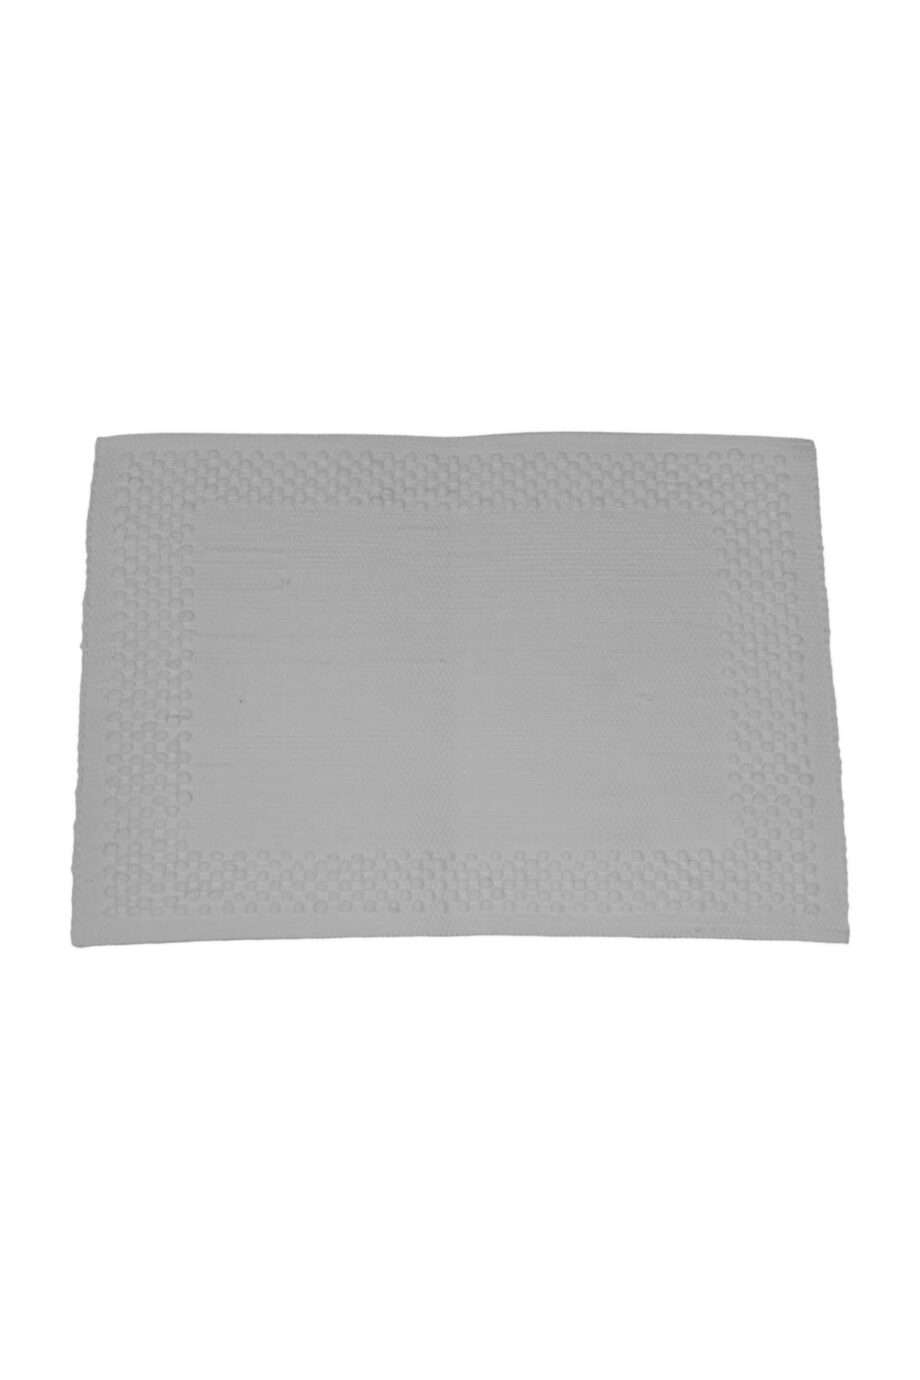 frame white woven cotton placemat small